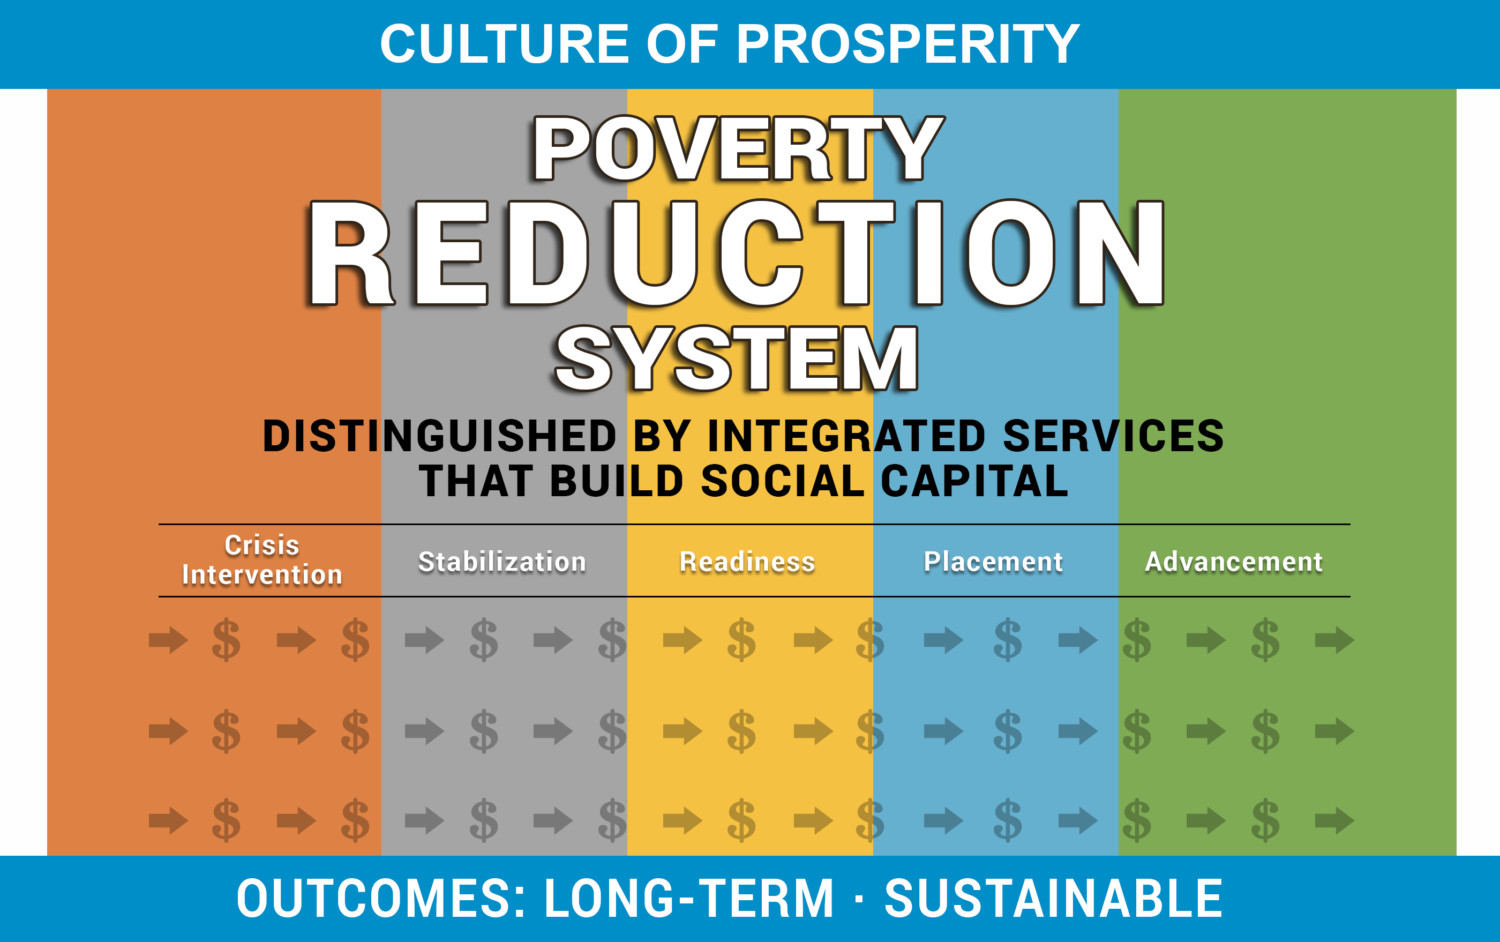 Poverty Reduction